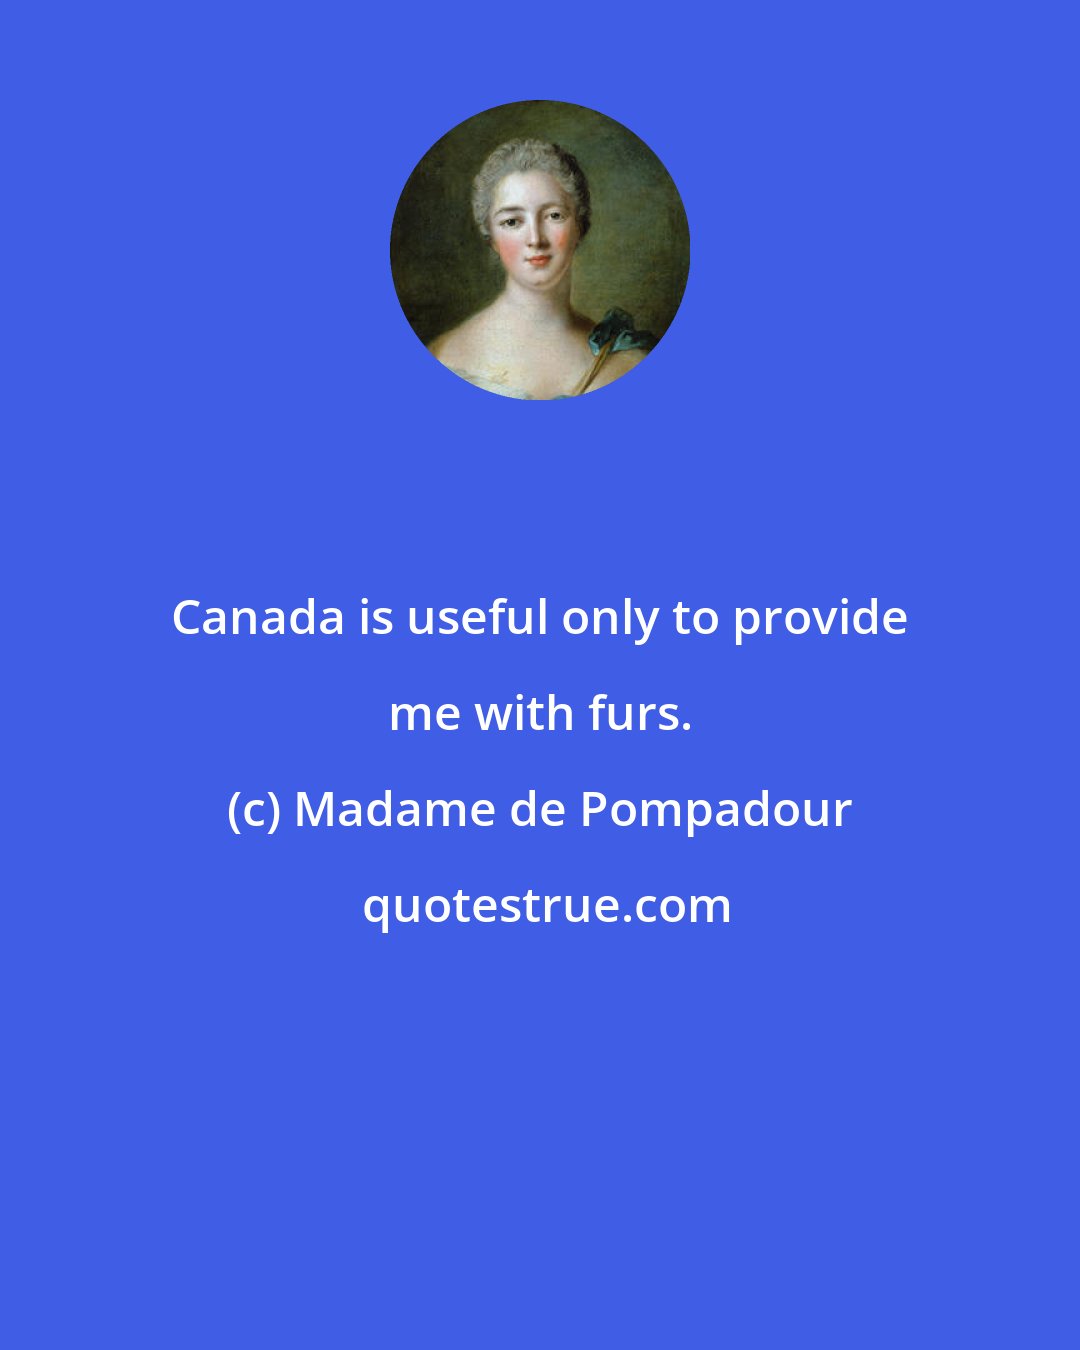 Madame de Pompadour: Canada is useful only to provide me with furs.